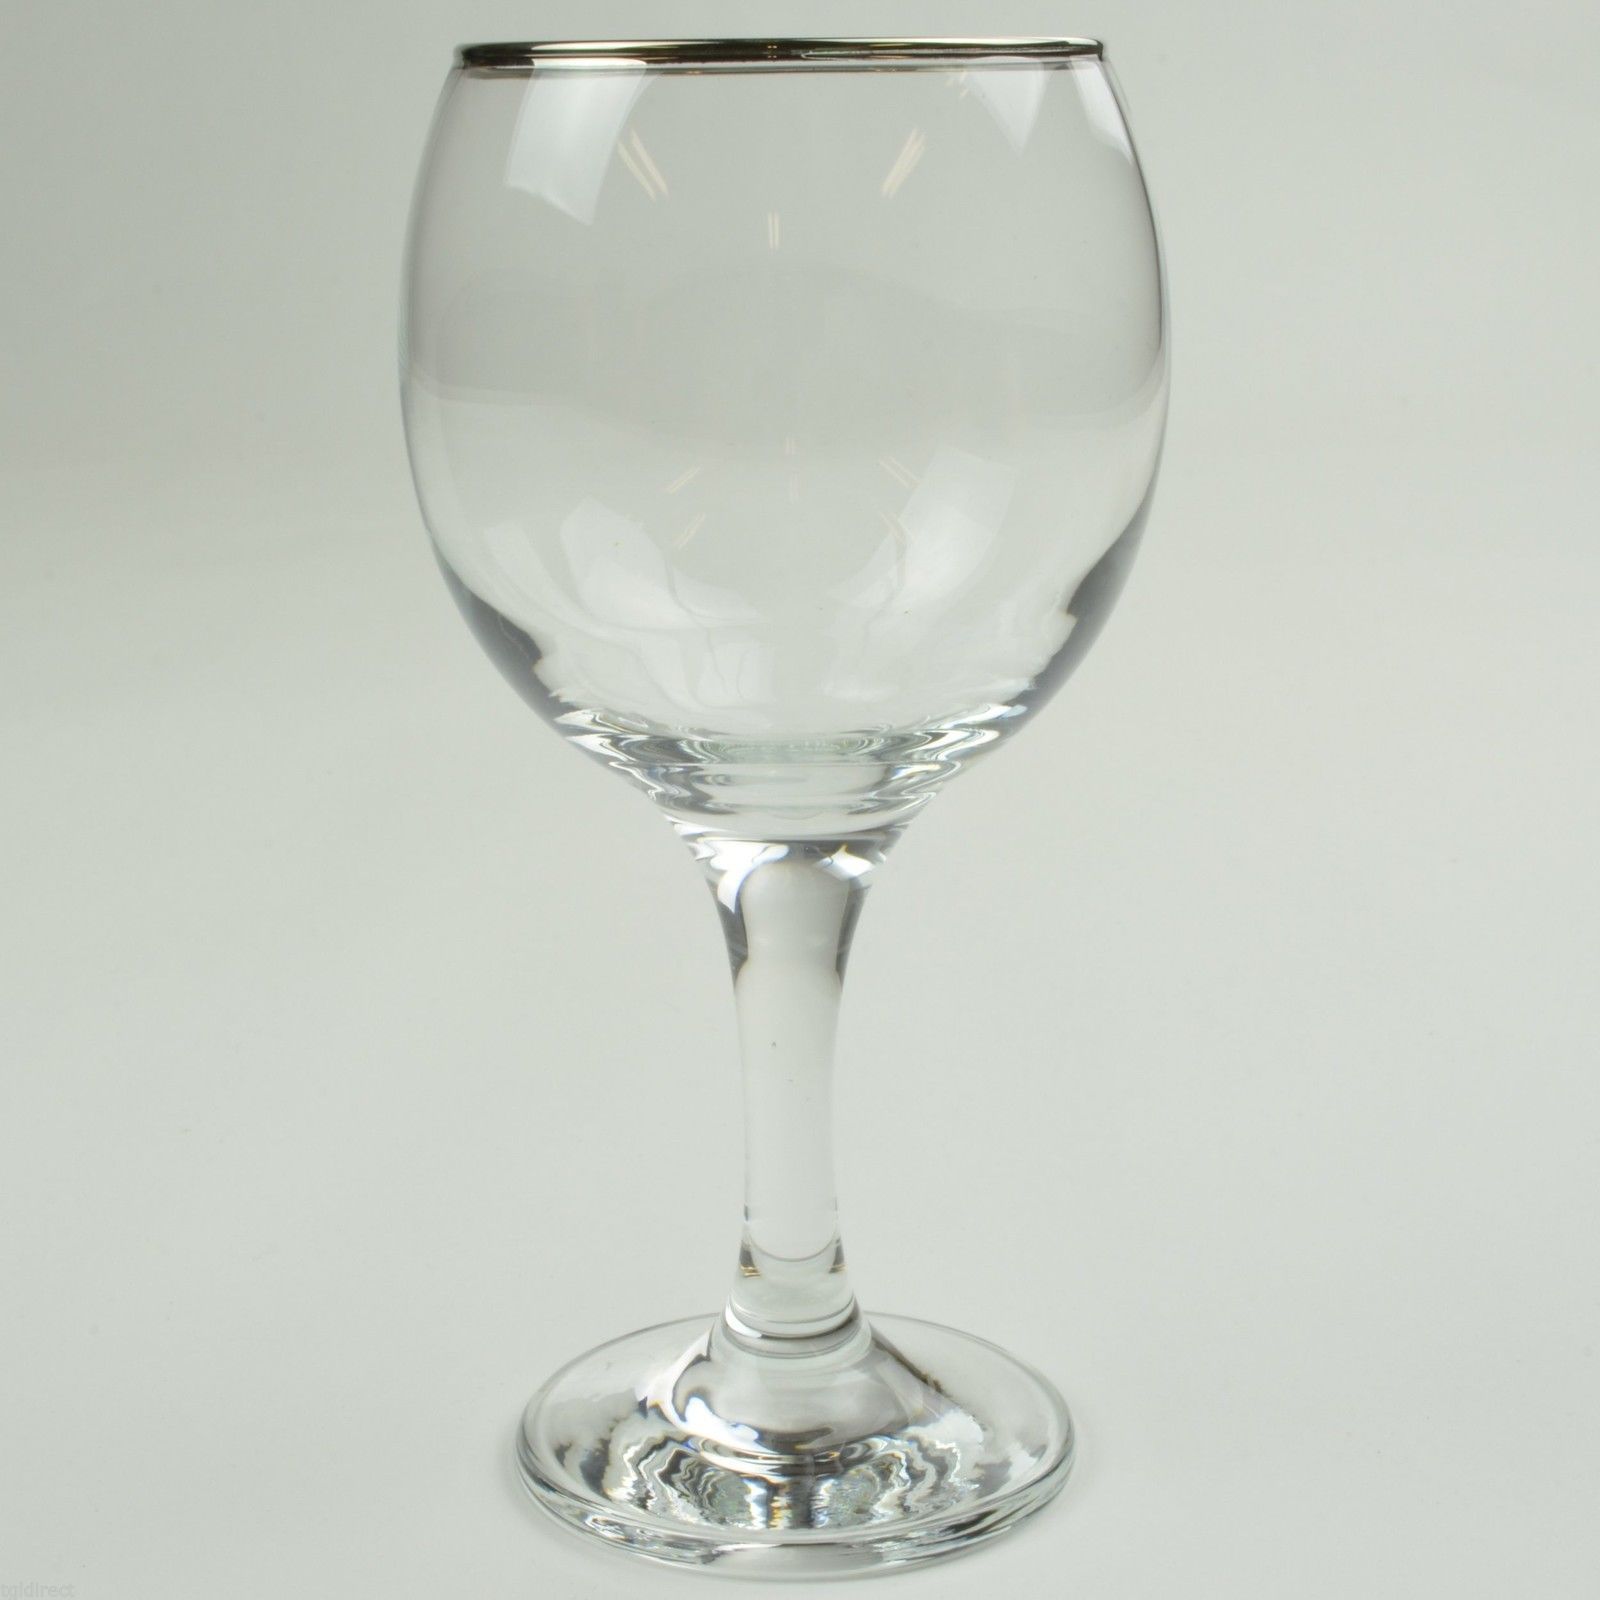 Gibson Everyday Essential Home Platinum Band Goblet Clear Glass Stemware Wine - $6.89